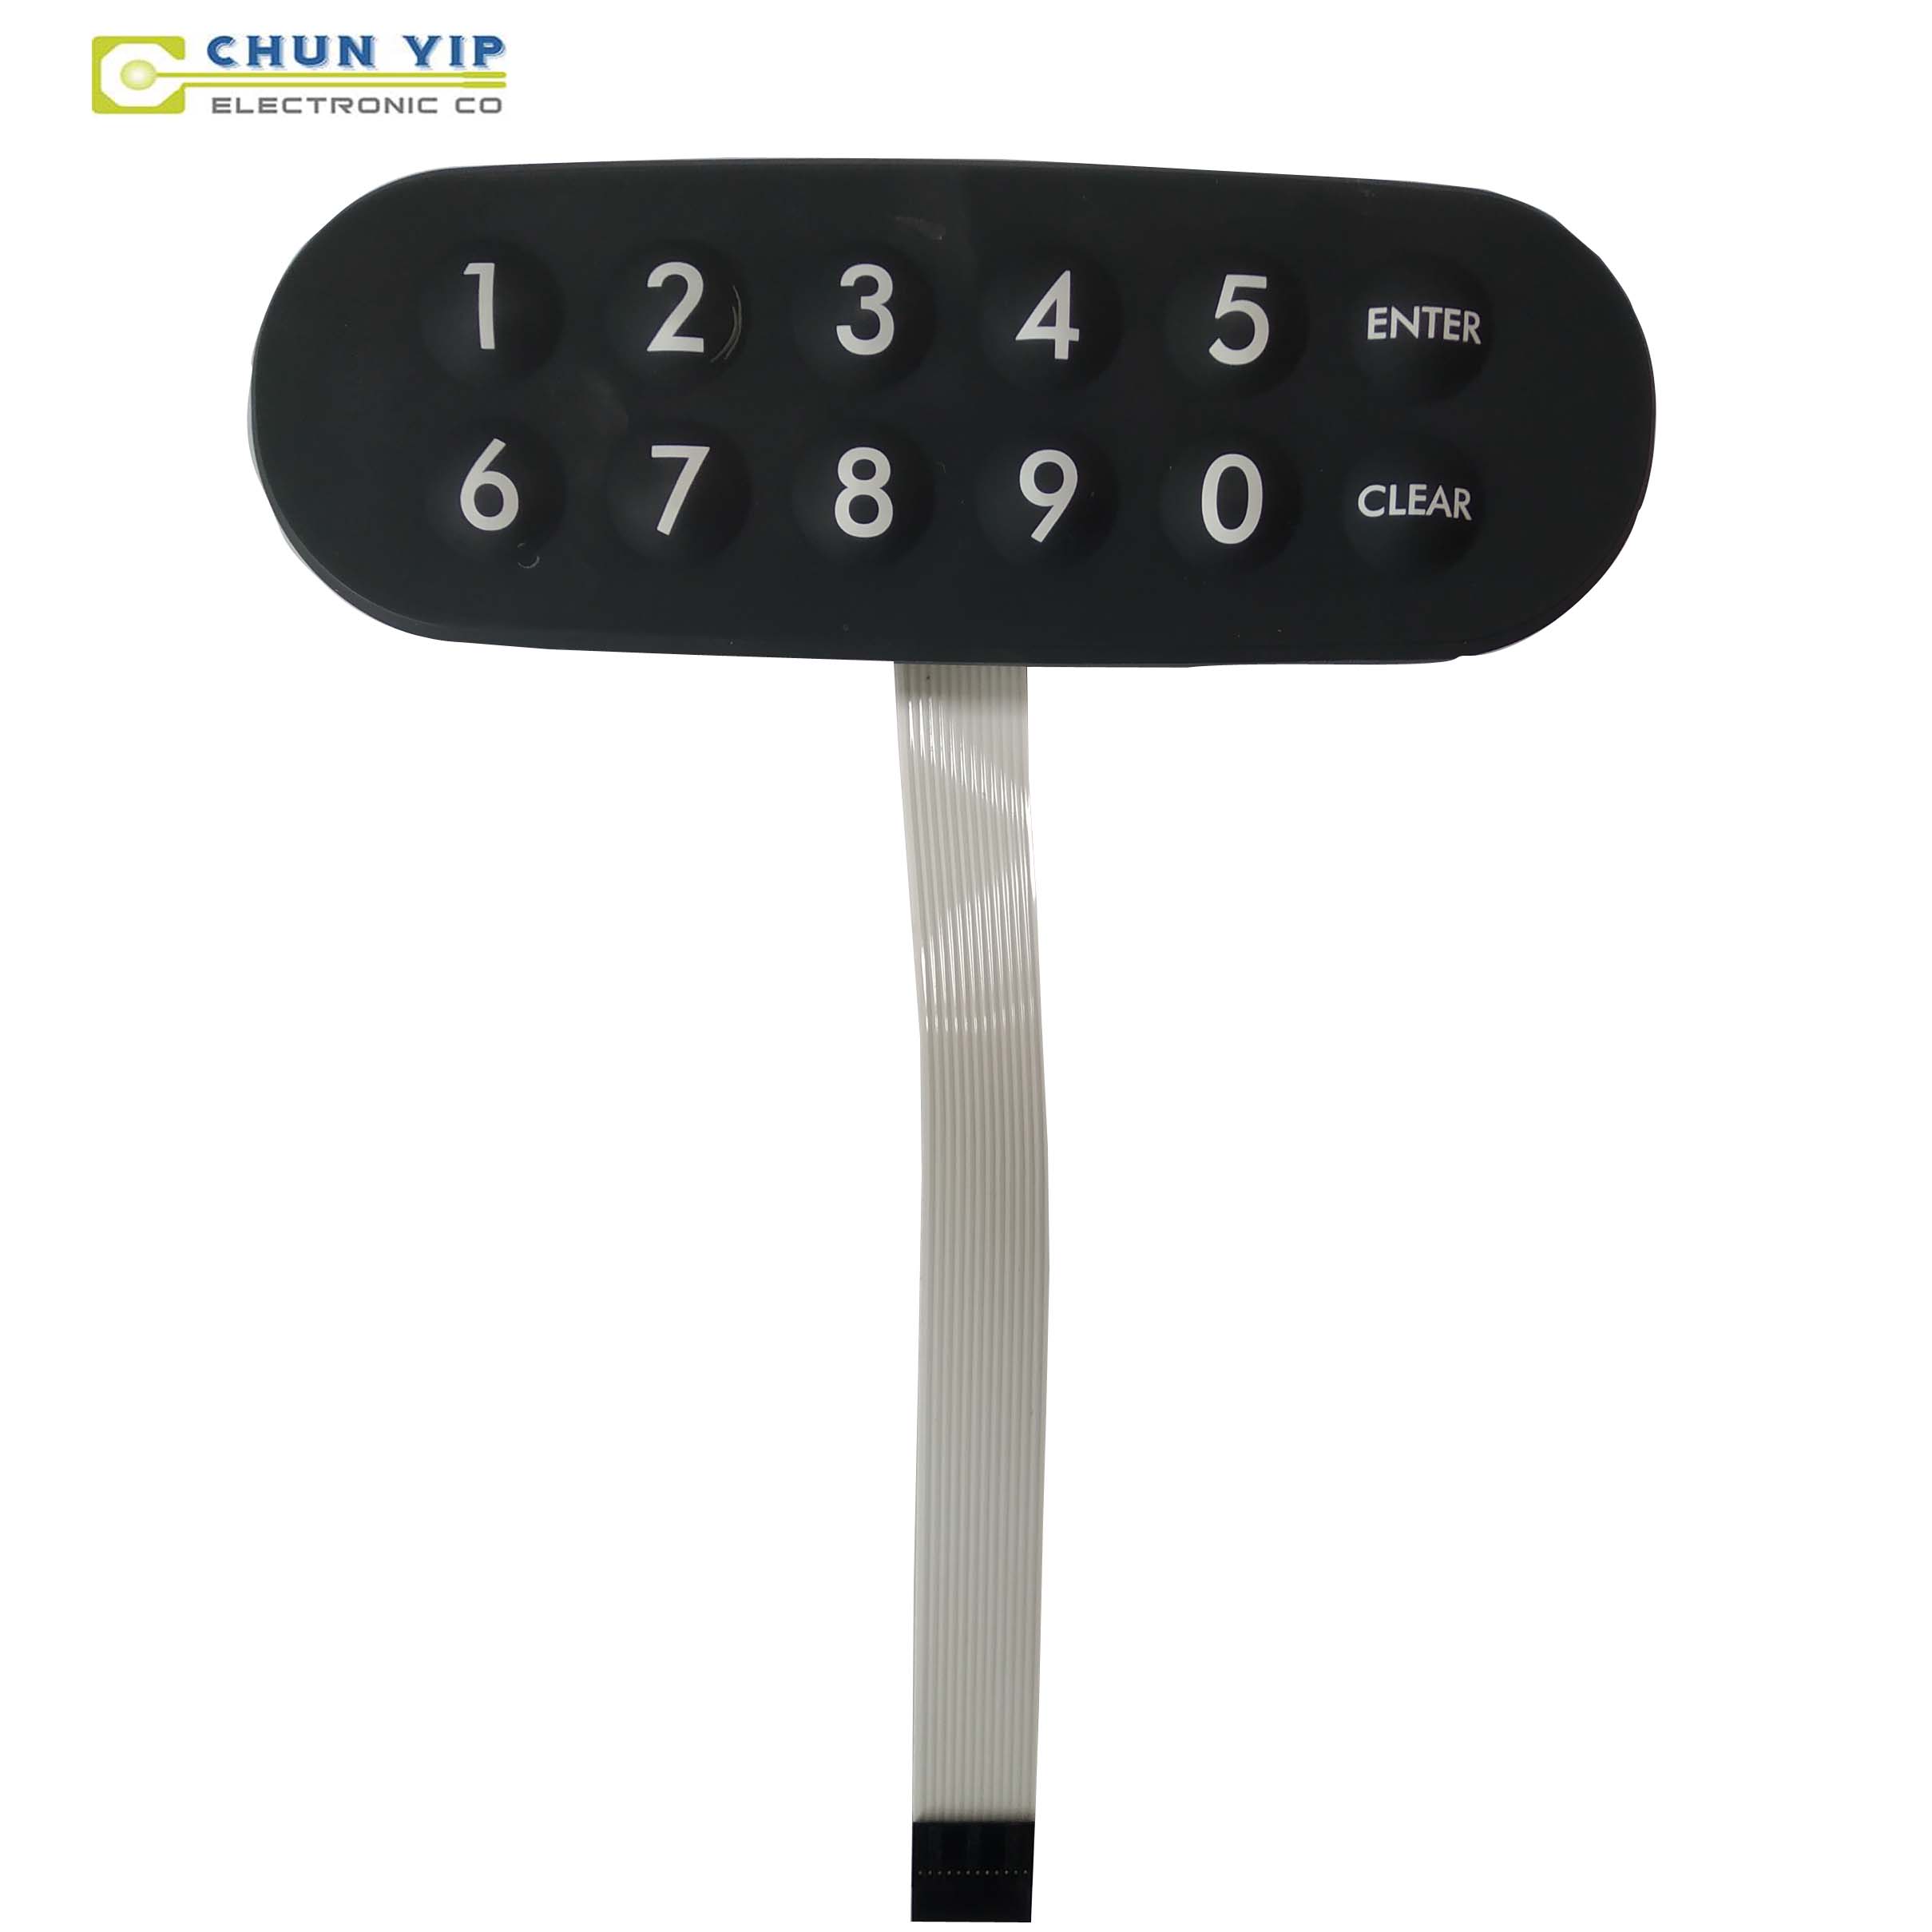 Embossed Ppgi Cheap Membrane Product -
 Silicone/Rubber/Metal Membrane Switch – Chun Yip